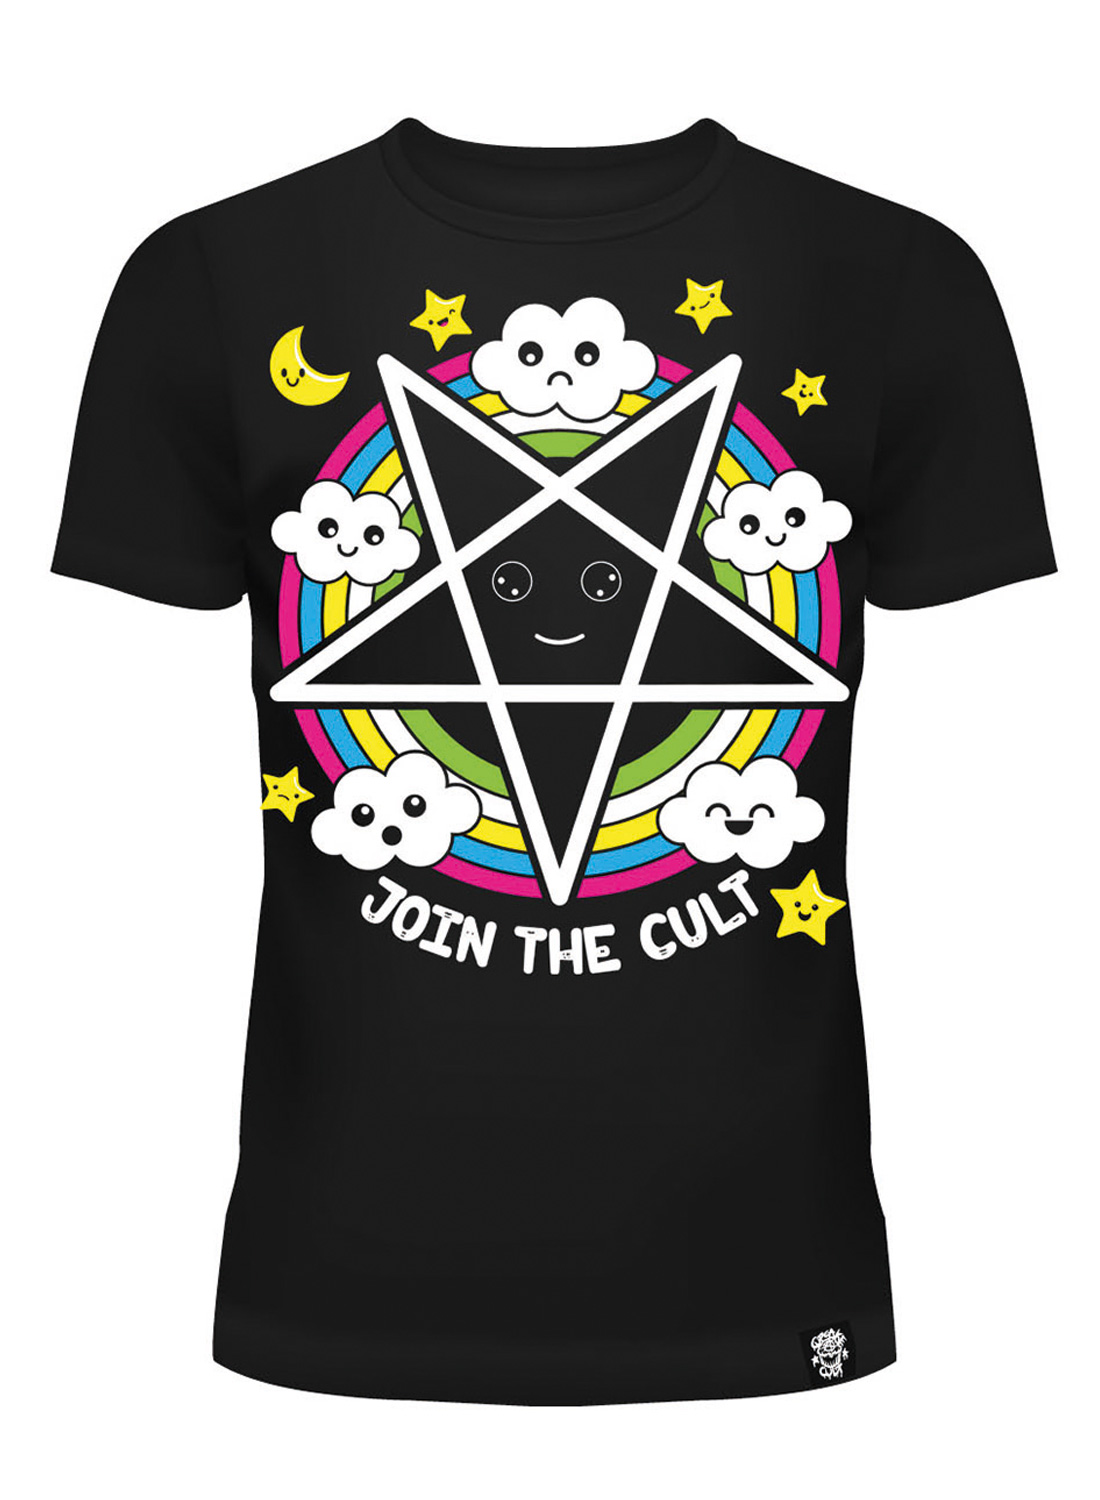 Join The Cult Tee